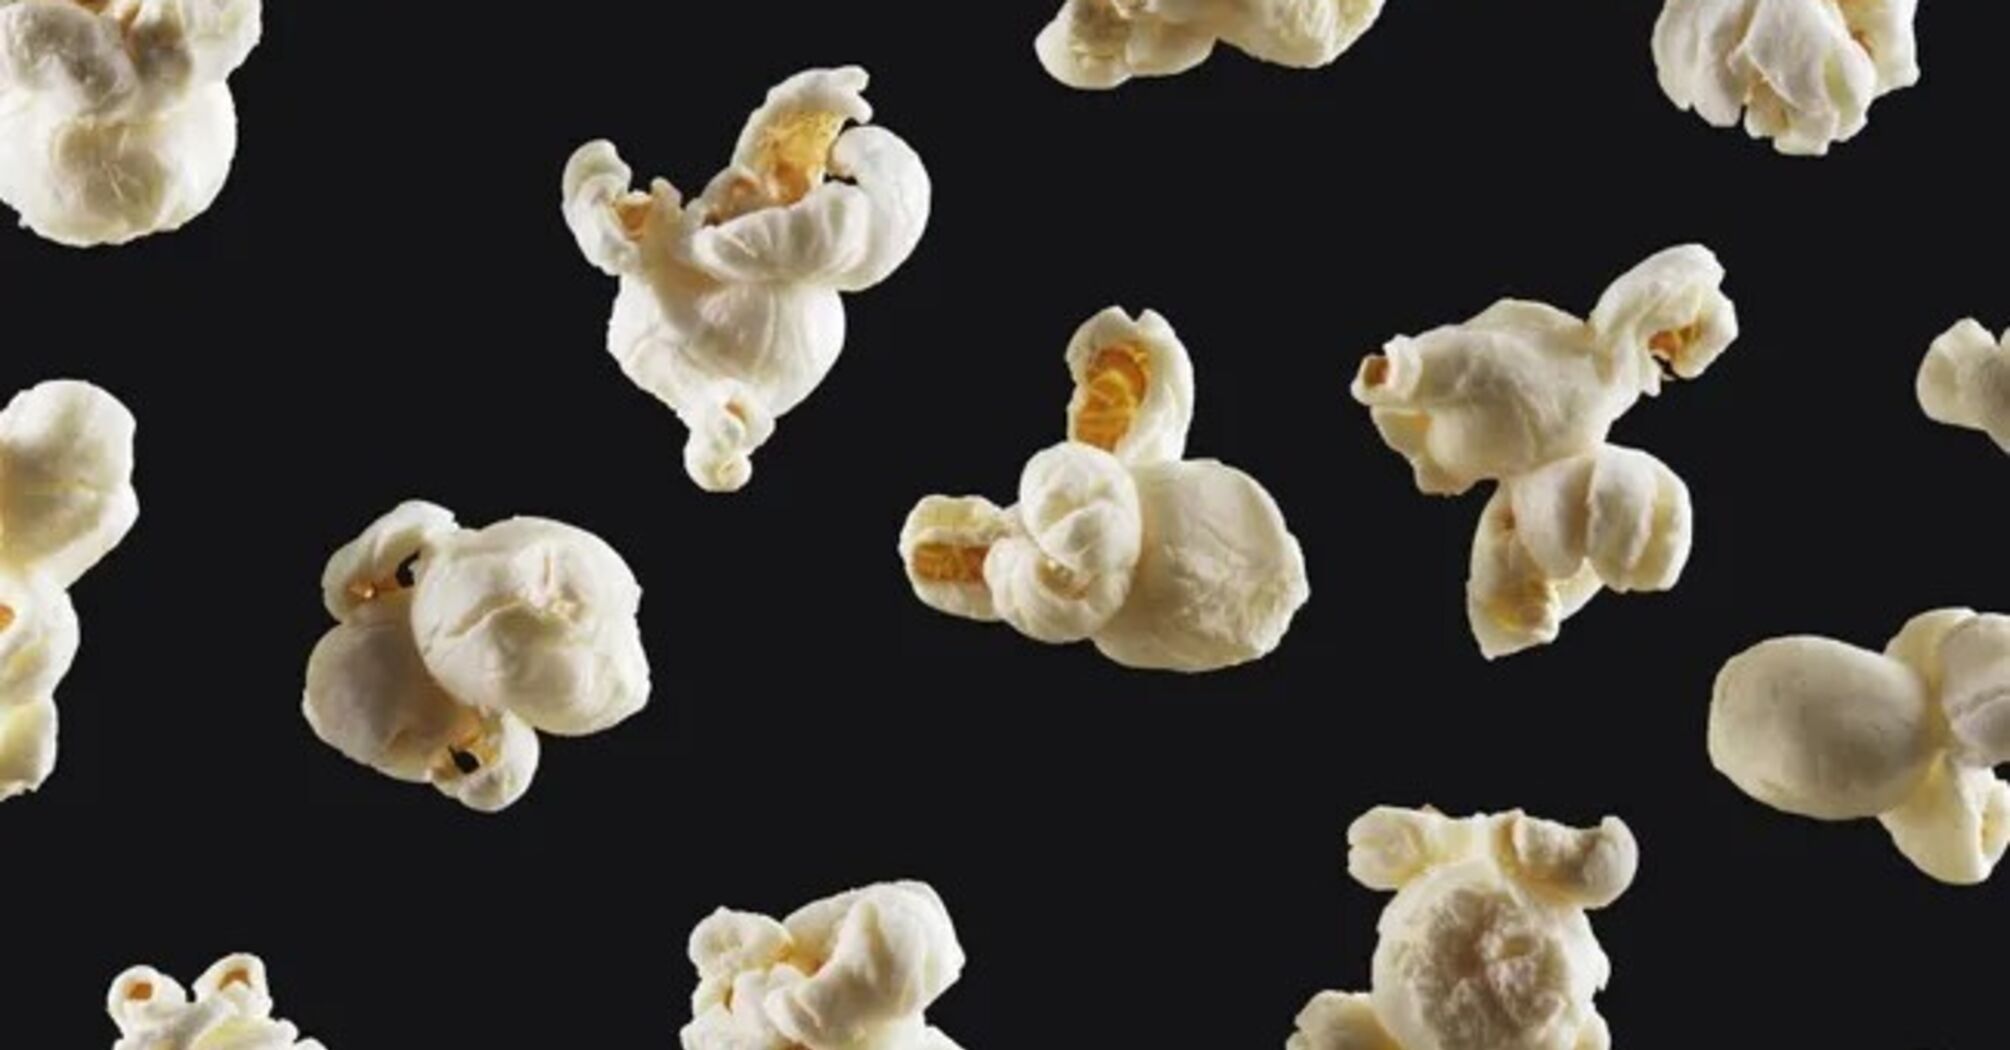 Popcorn was discovered nearly 7,000 years ago